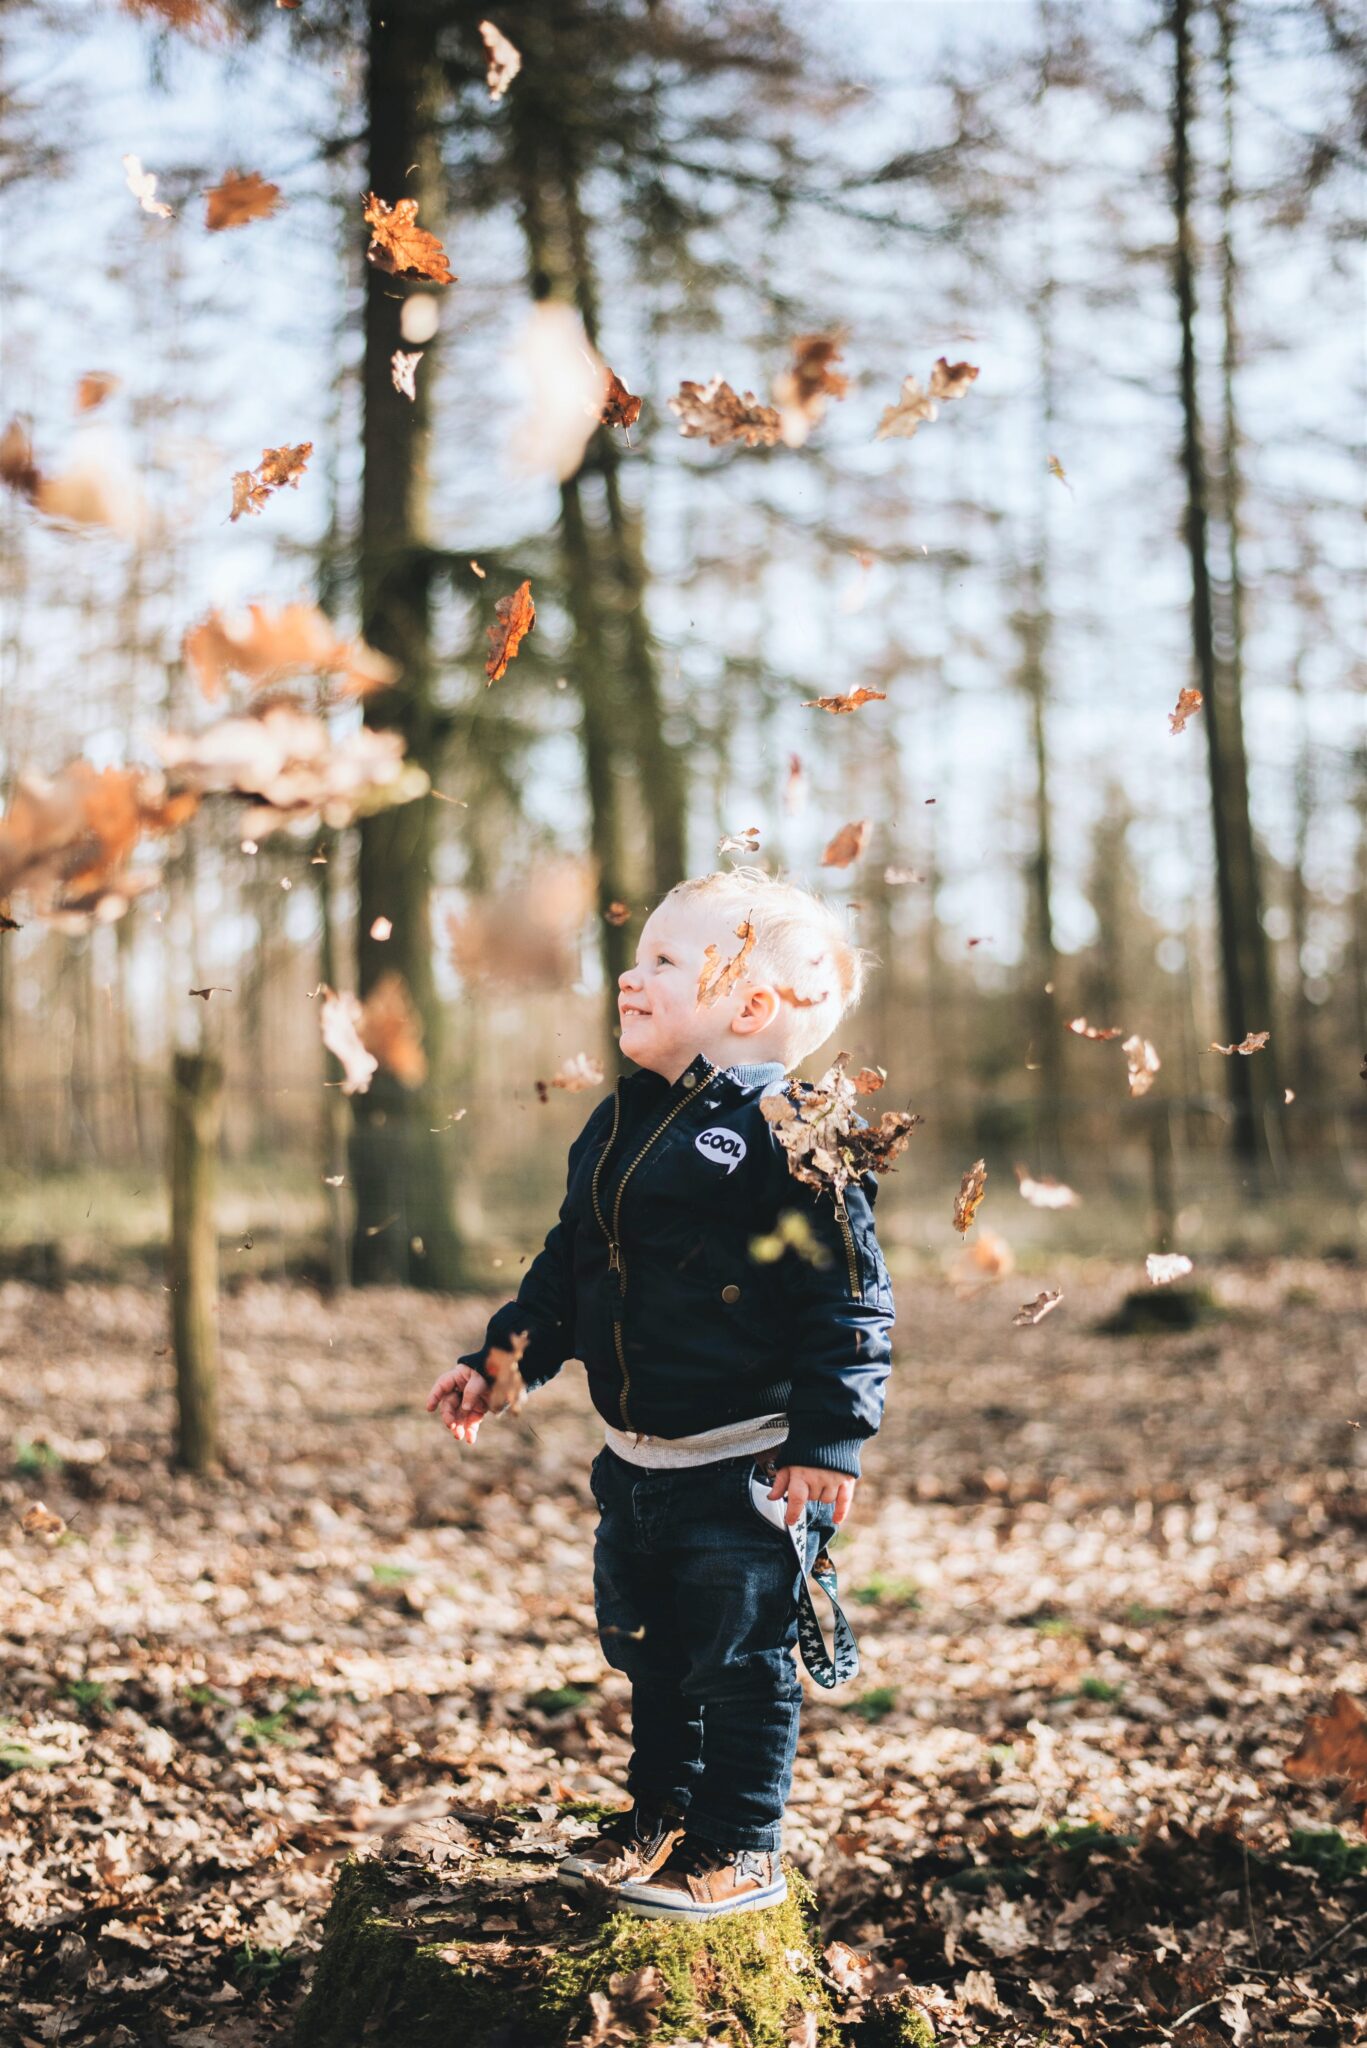 5 Fun Outdoor Play Ideas That Nurture Imagination and Learning